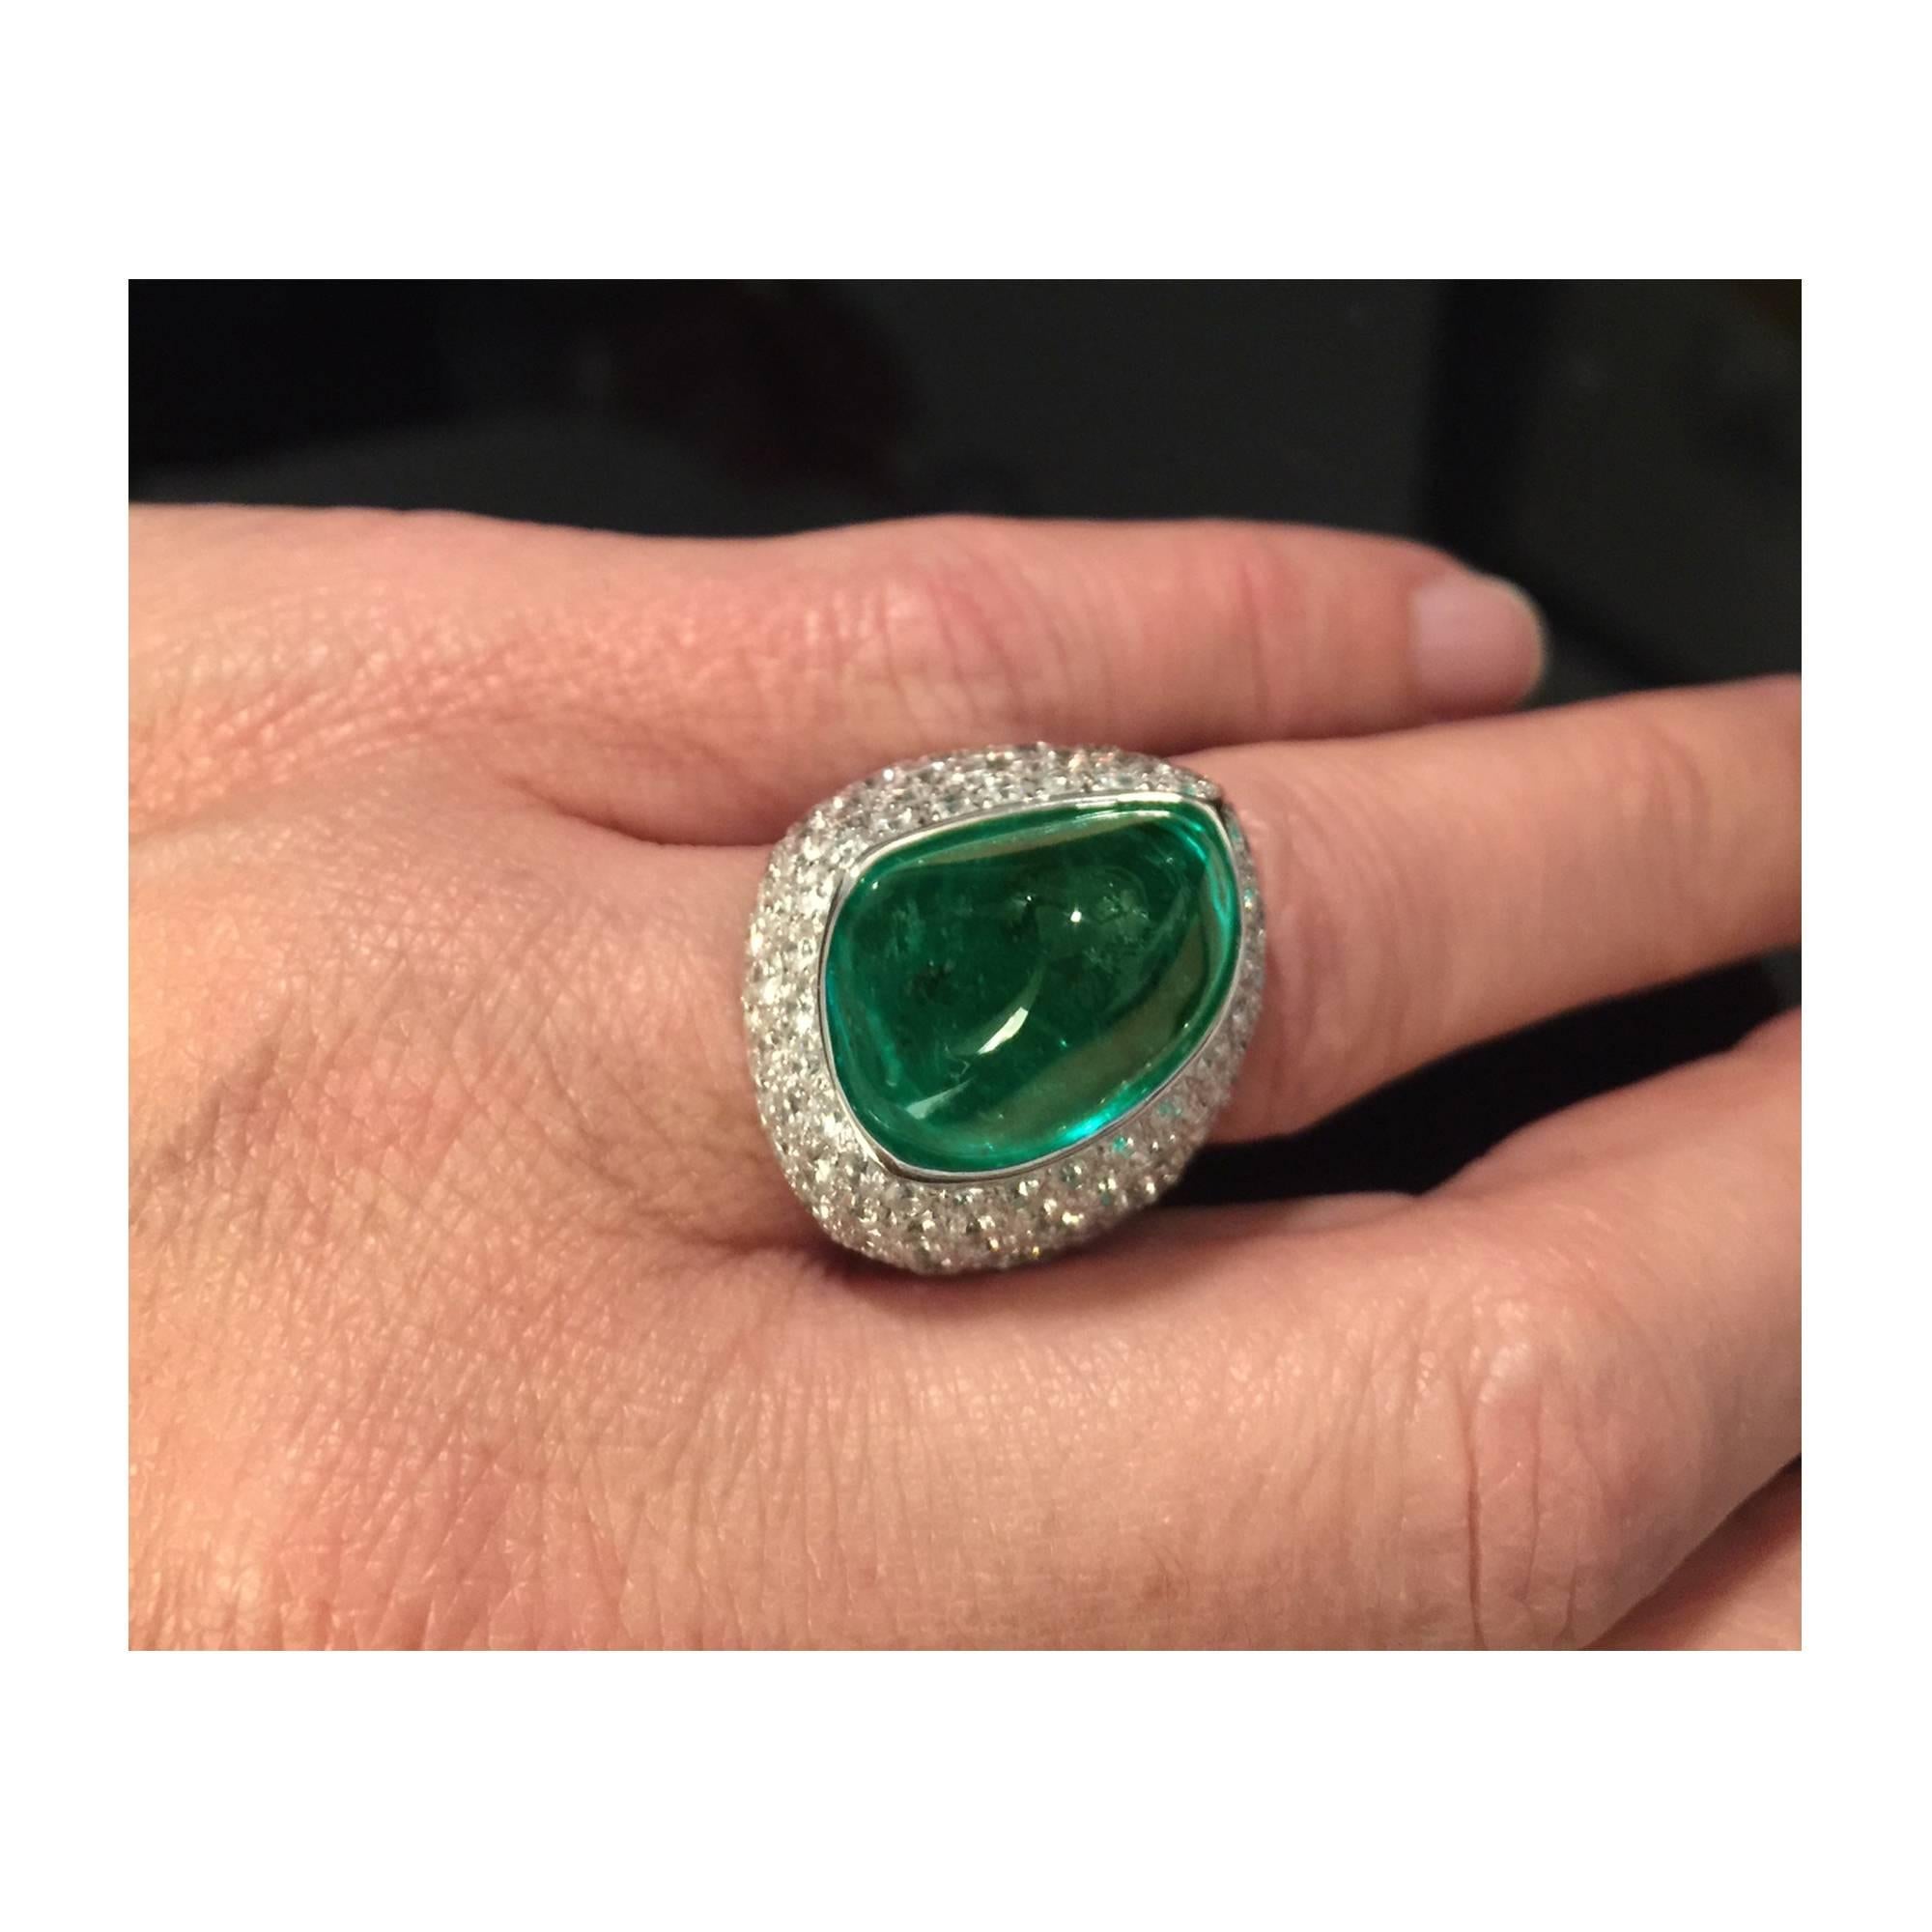 Italian size 14.5 - US size 7 - FR size 54.5 - Handmade in Italy
20.44ct. Cabochon Sugar Loaf Emerald.

The bond between Humanity and Nature is, for obvious reasons, indissoluble and precious stones symbolize this fascination; they excite the